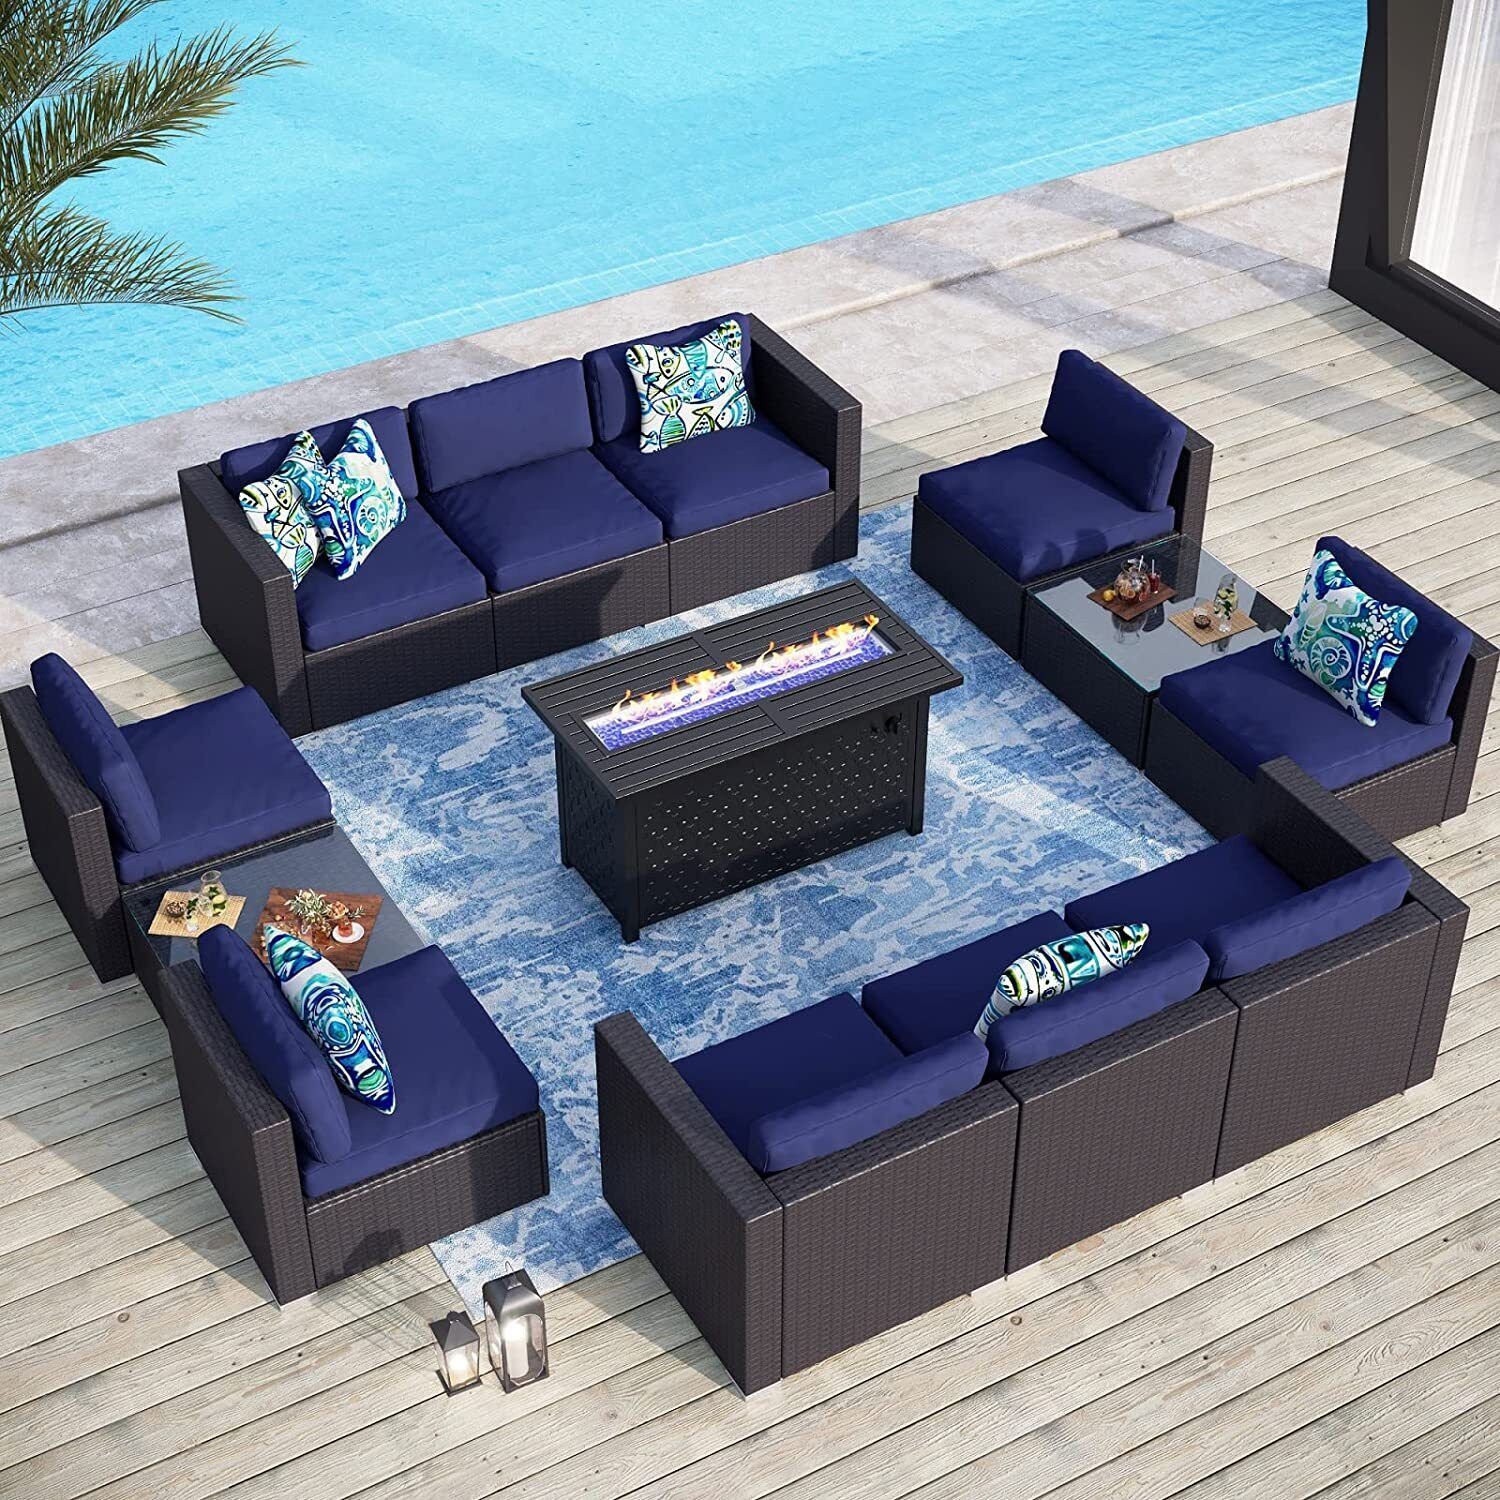 13 Piece Rattan Furniture Set W/ Fire Pit Table Patio Wicker Sectional Sofa  Set | Ebay For Fire Pit Table Wicker Sectional Sofa Set (View 15 of 15)